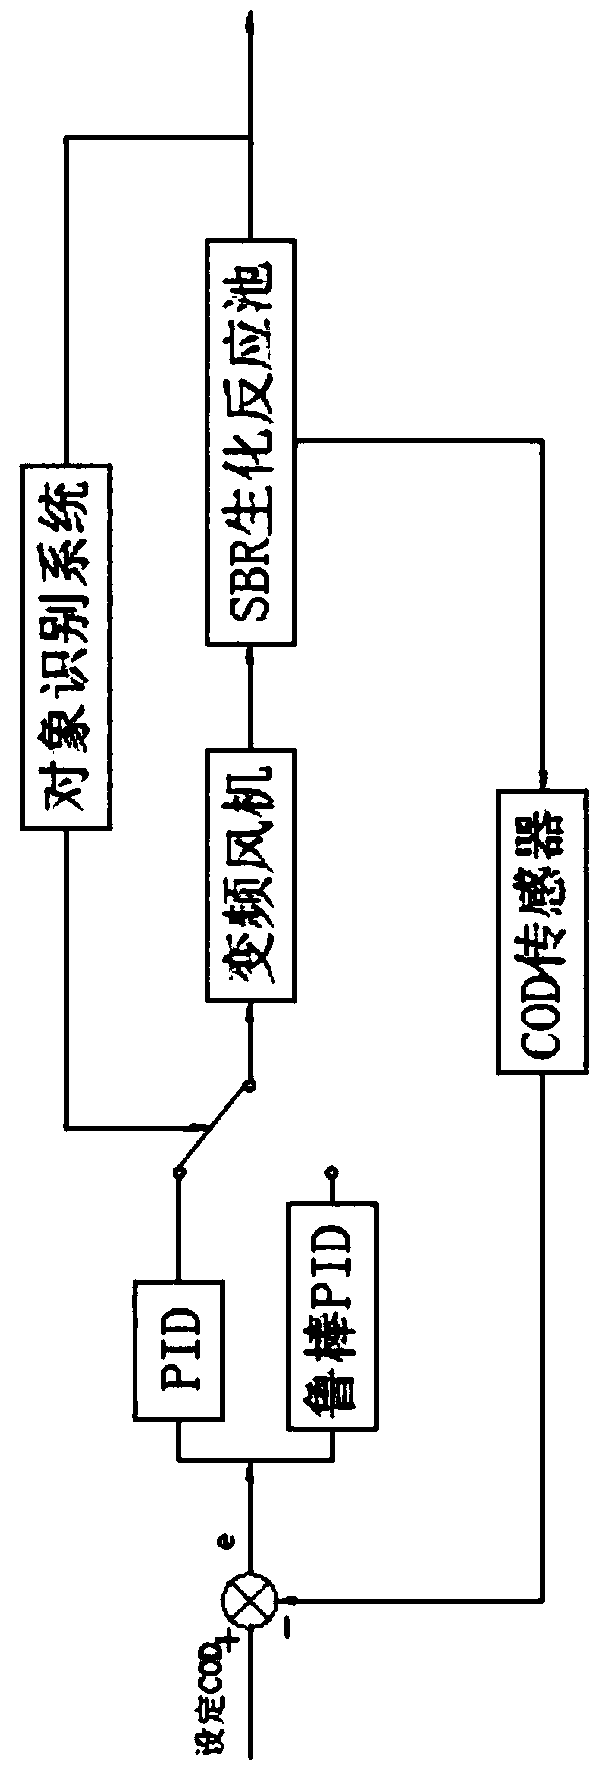 COD (chemical oxygen demand) control method for SBR (sequencing batch reactor) biochemical reaction tank